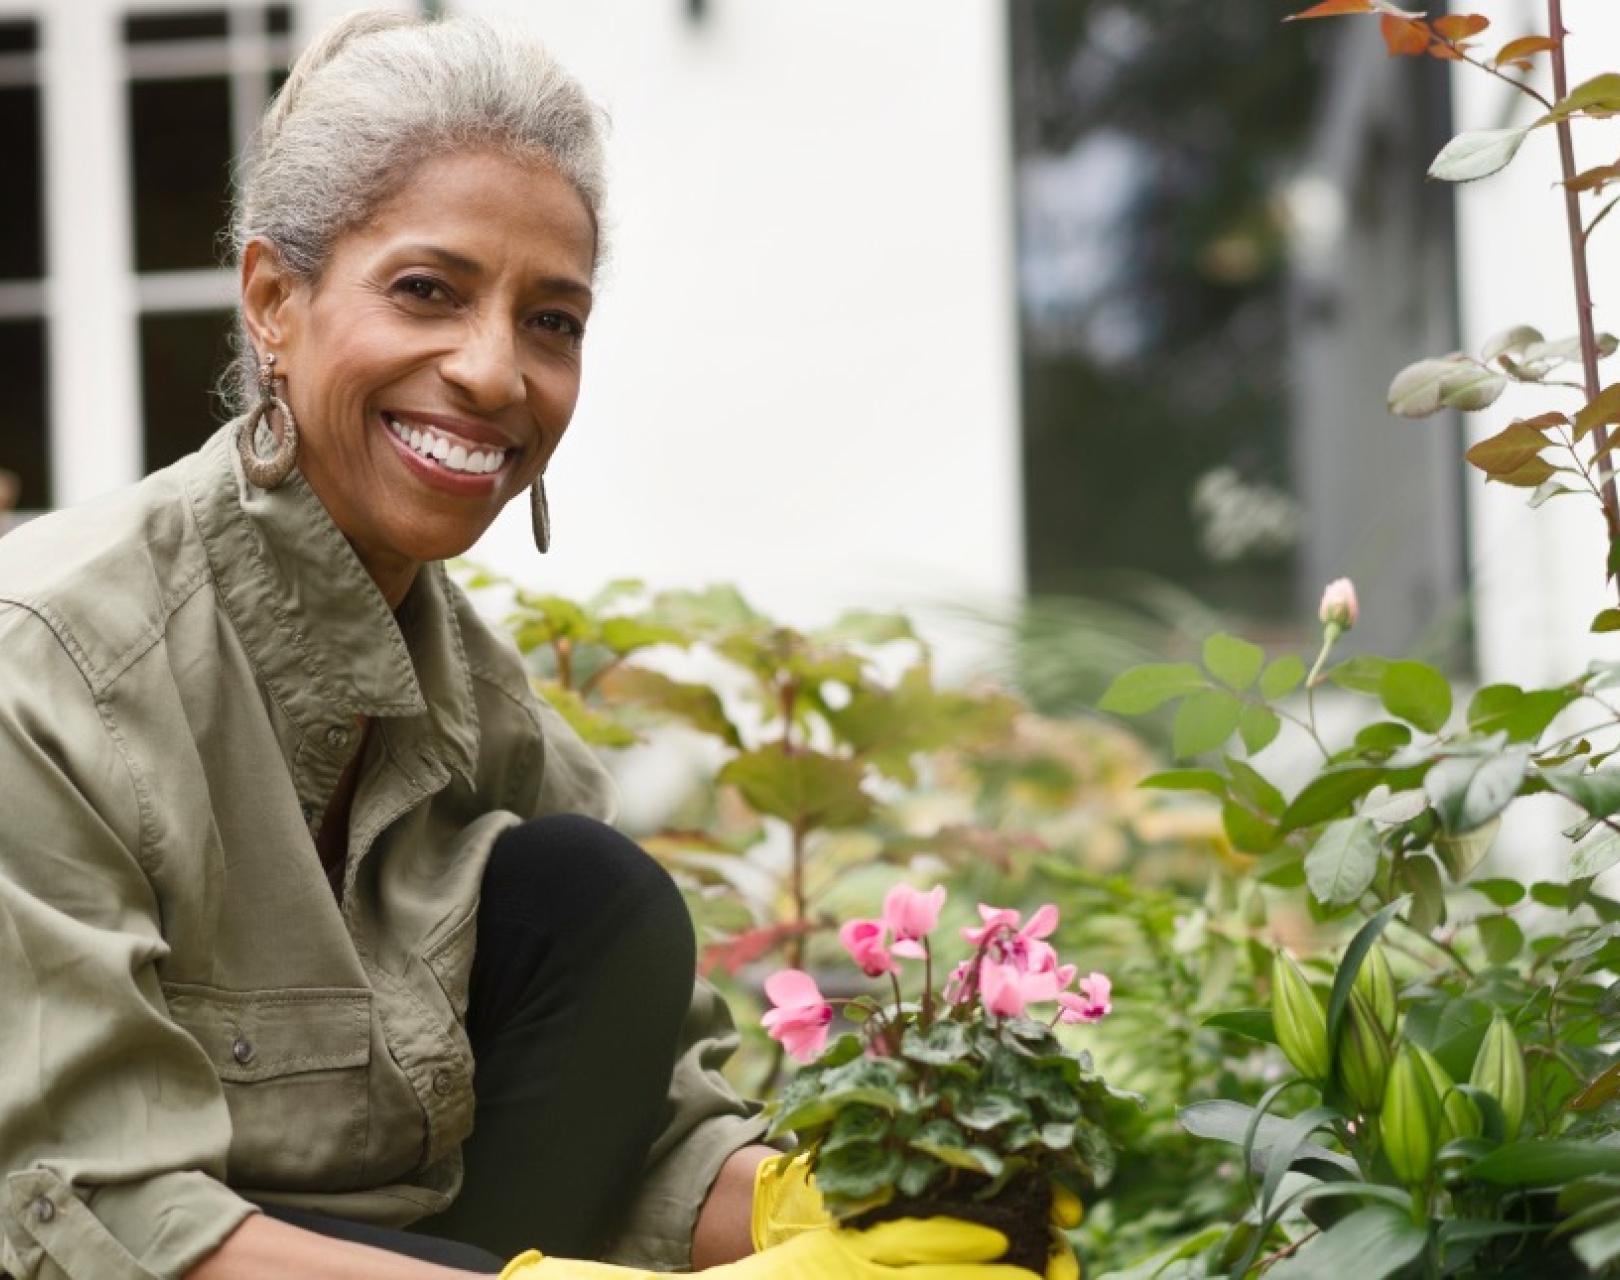 A smiling, older Black woman with grey hair, hooped earrings and khaki jacket, kneels down in her garden. Wearing yellow gloves, she is planting a pink flowering plant. Around her are green bushes a wooden bench and a house